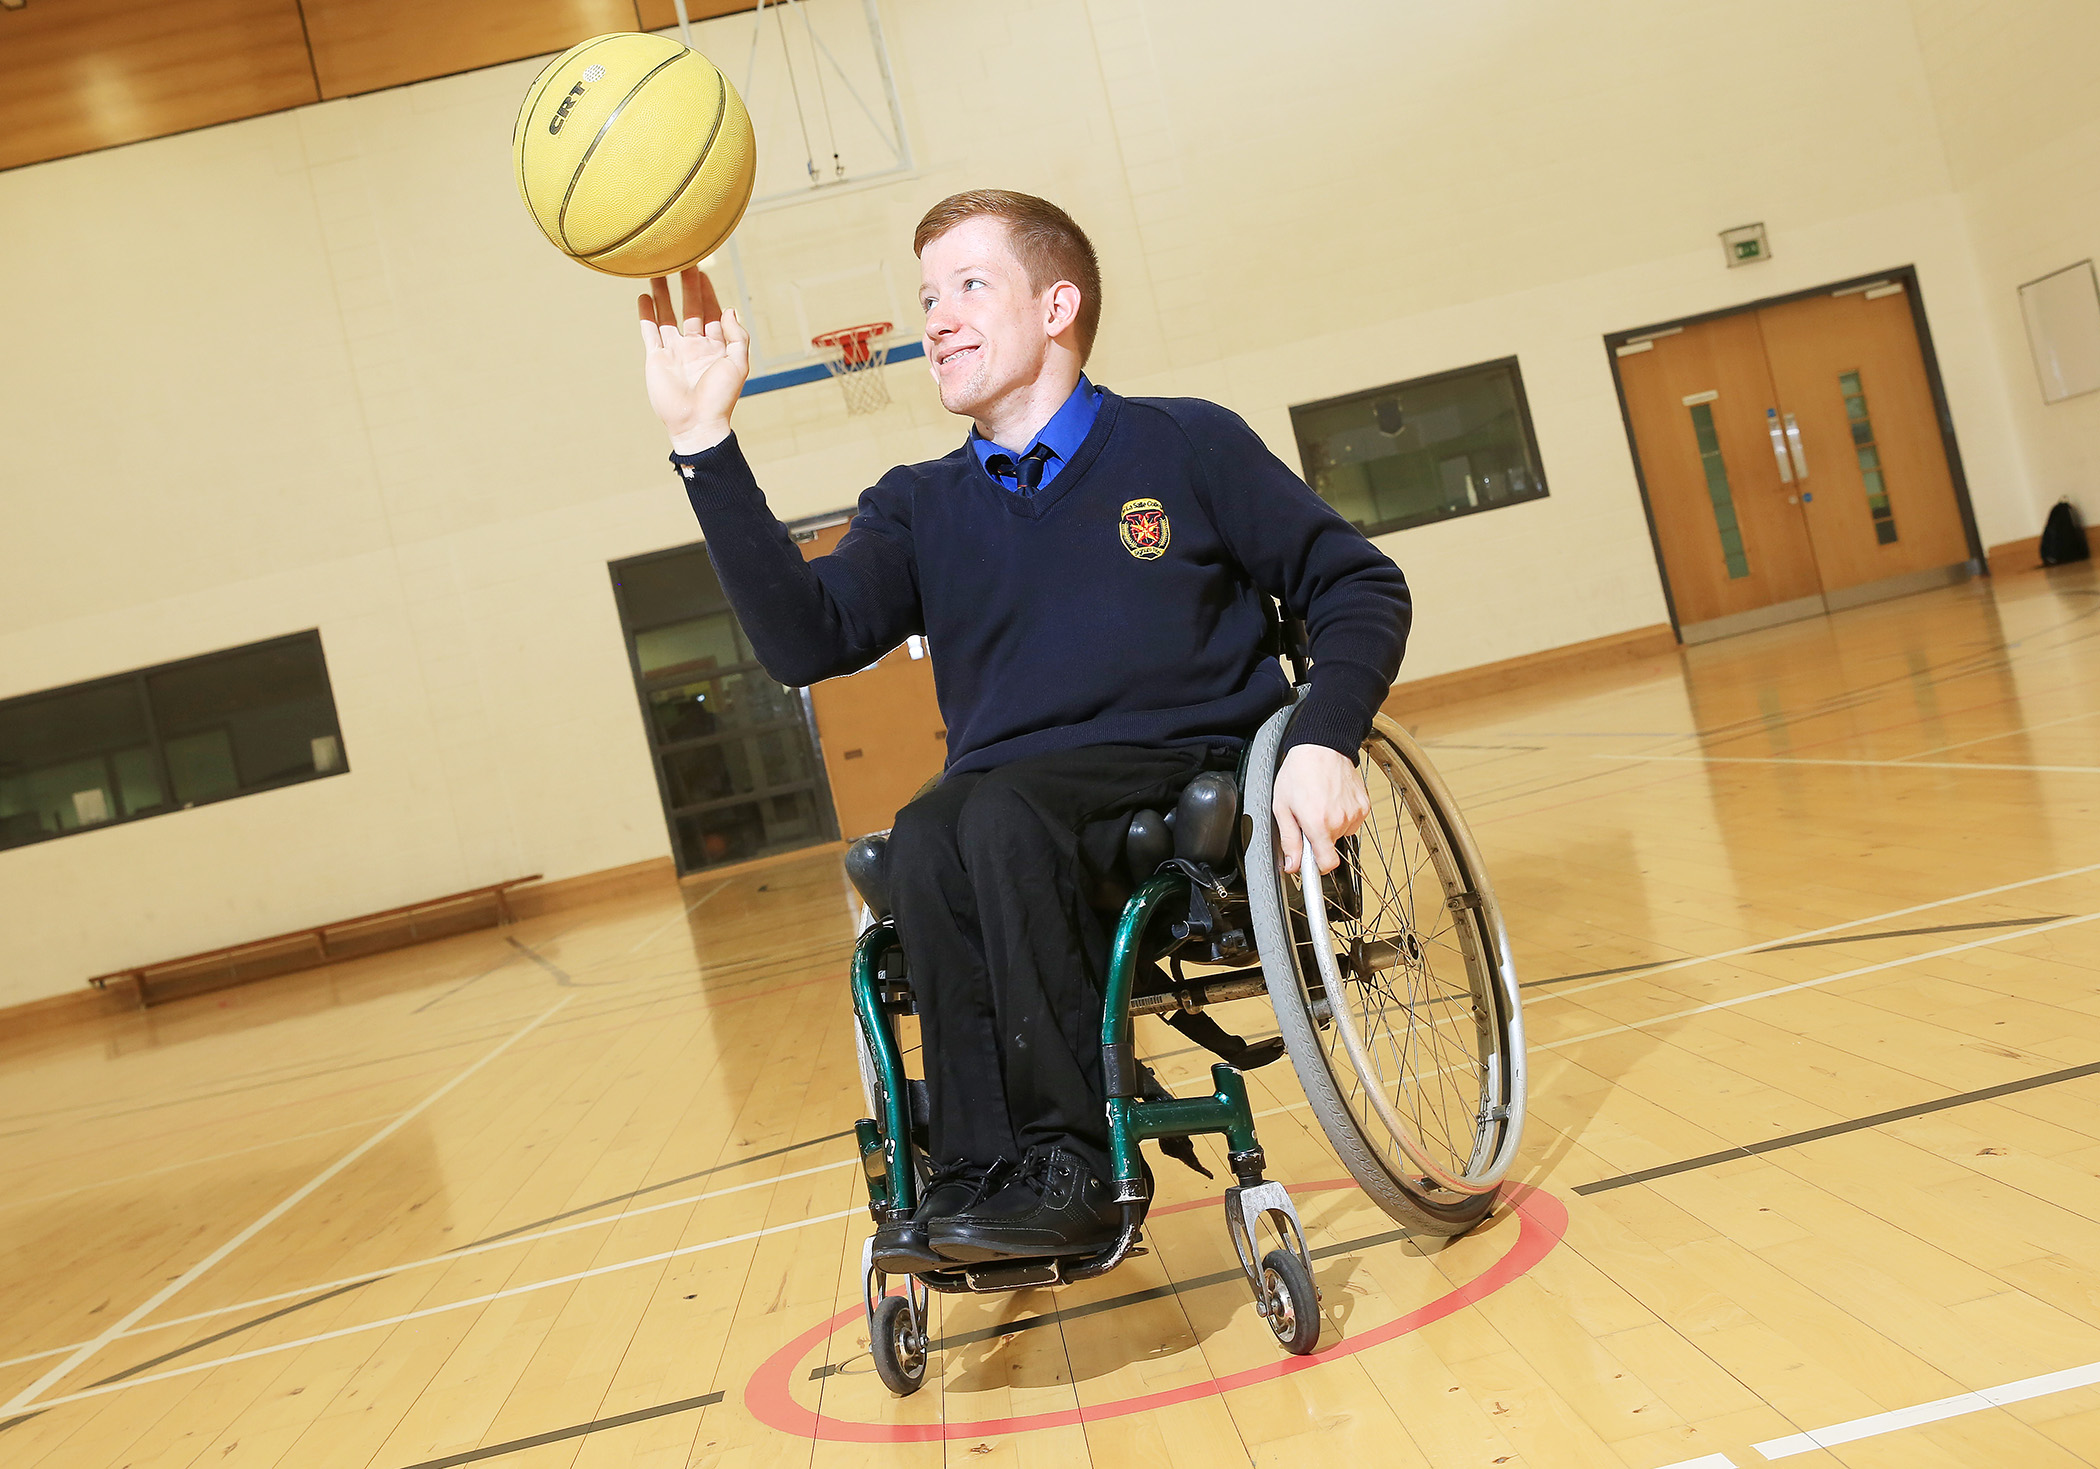 De La Salle student Kenny Murphy is part of the Irish team that will travel to Bosnia next month to compete in the U17 wheelchair basketball European Championships